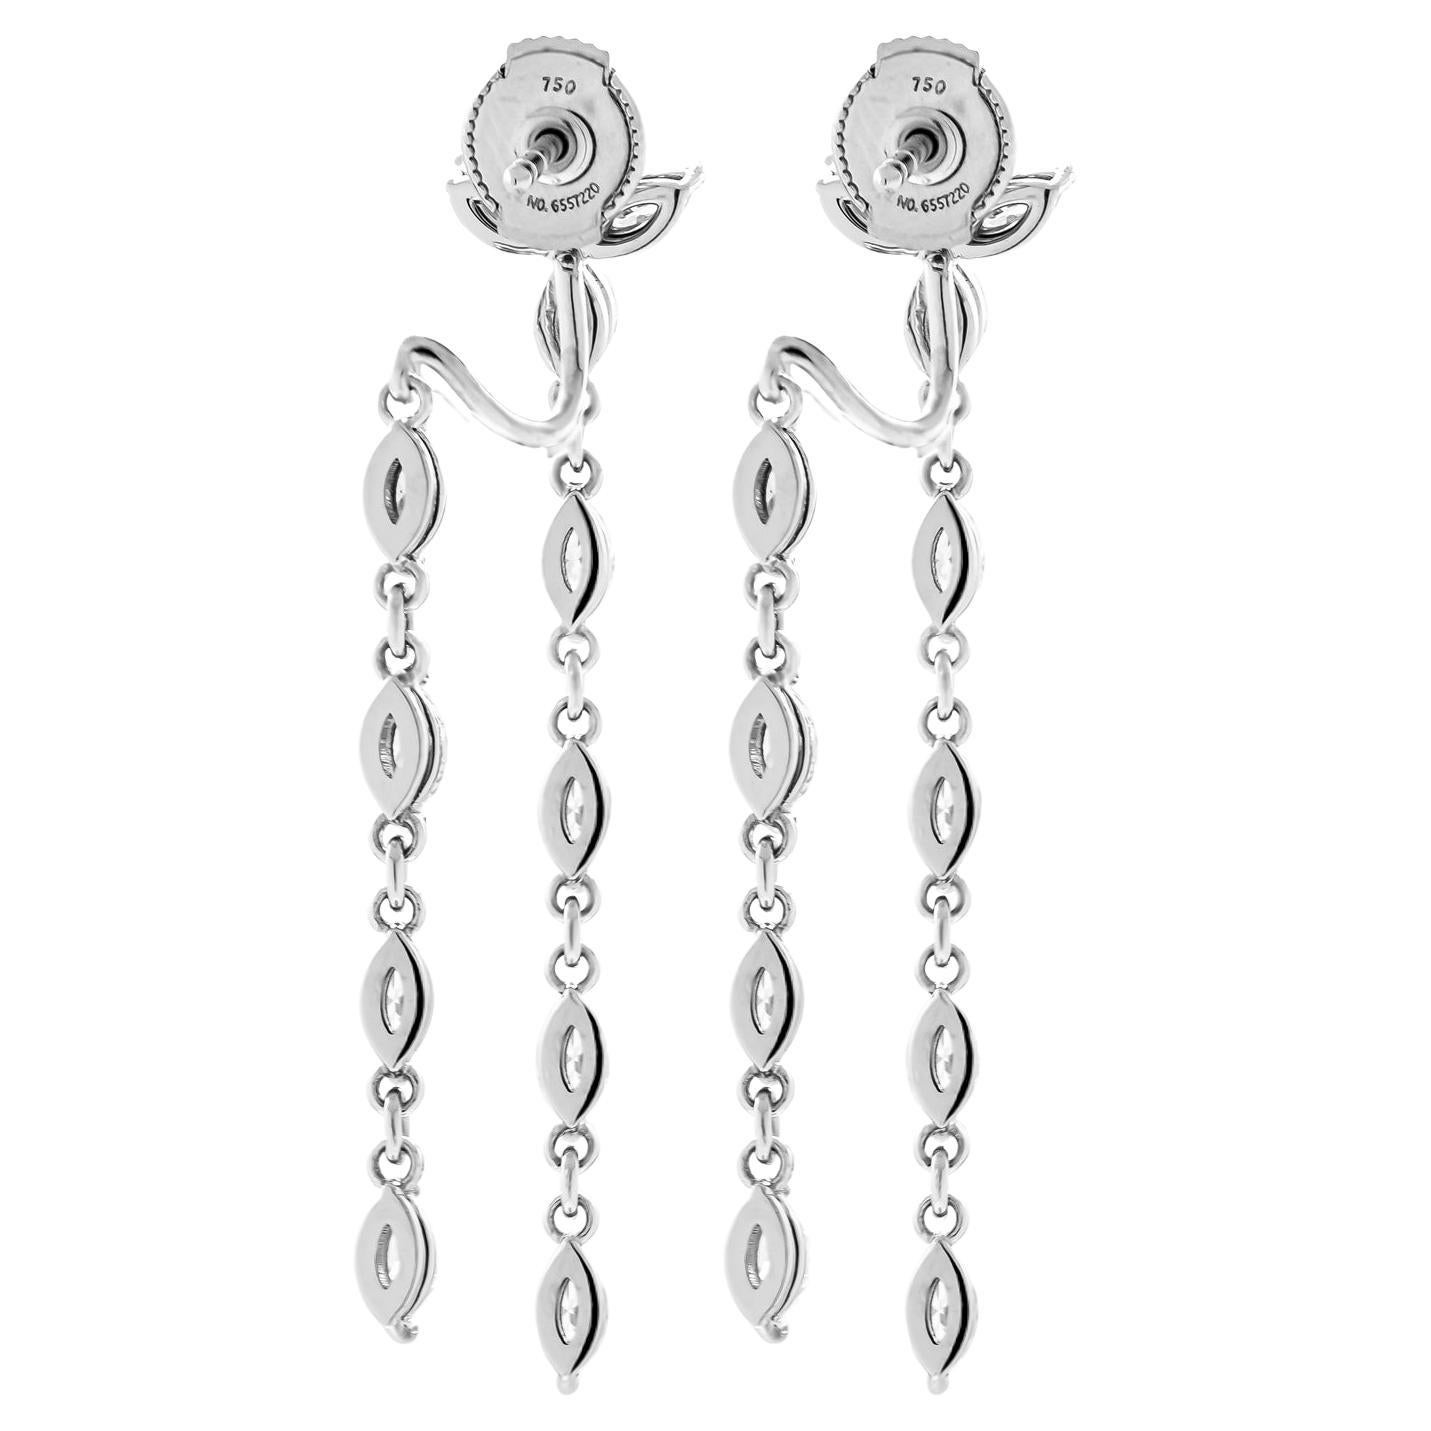 Drop earrings in 18K White Gold 
2 Round Diamonds 4.4mm each -0.66CT
22 Marquee diamonds total carat weight: 3.24ct

Comes in a box, appraisal available upon request.
Retail Value: 25,000.00$